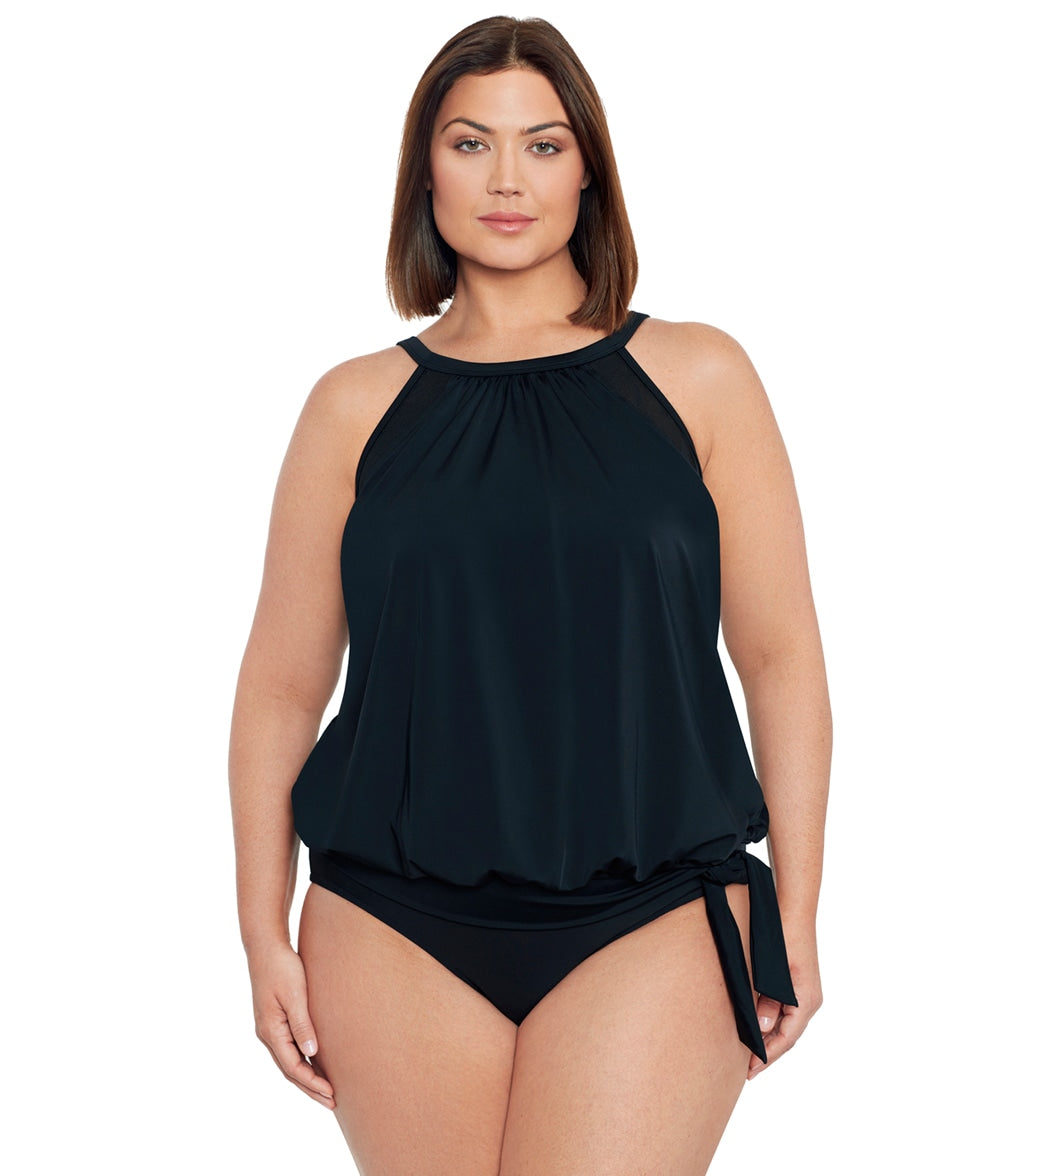 Shape Solver By Penbrooke Womens Plus Size Meshed Up High Neck Blouson Tankini Top